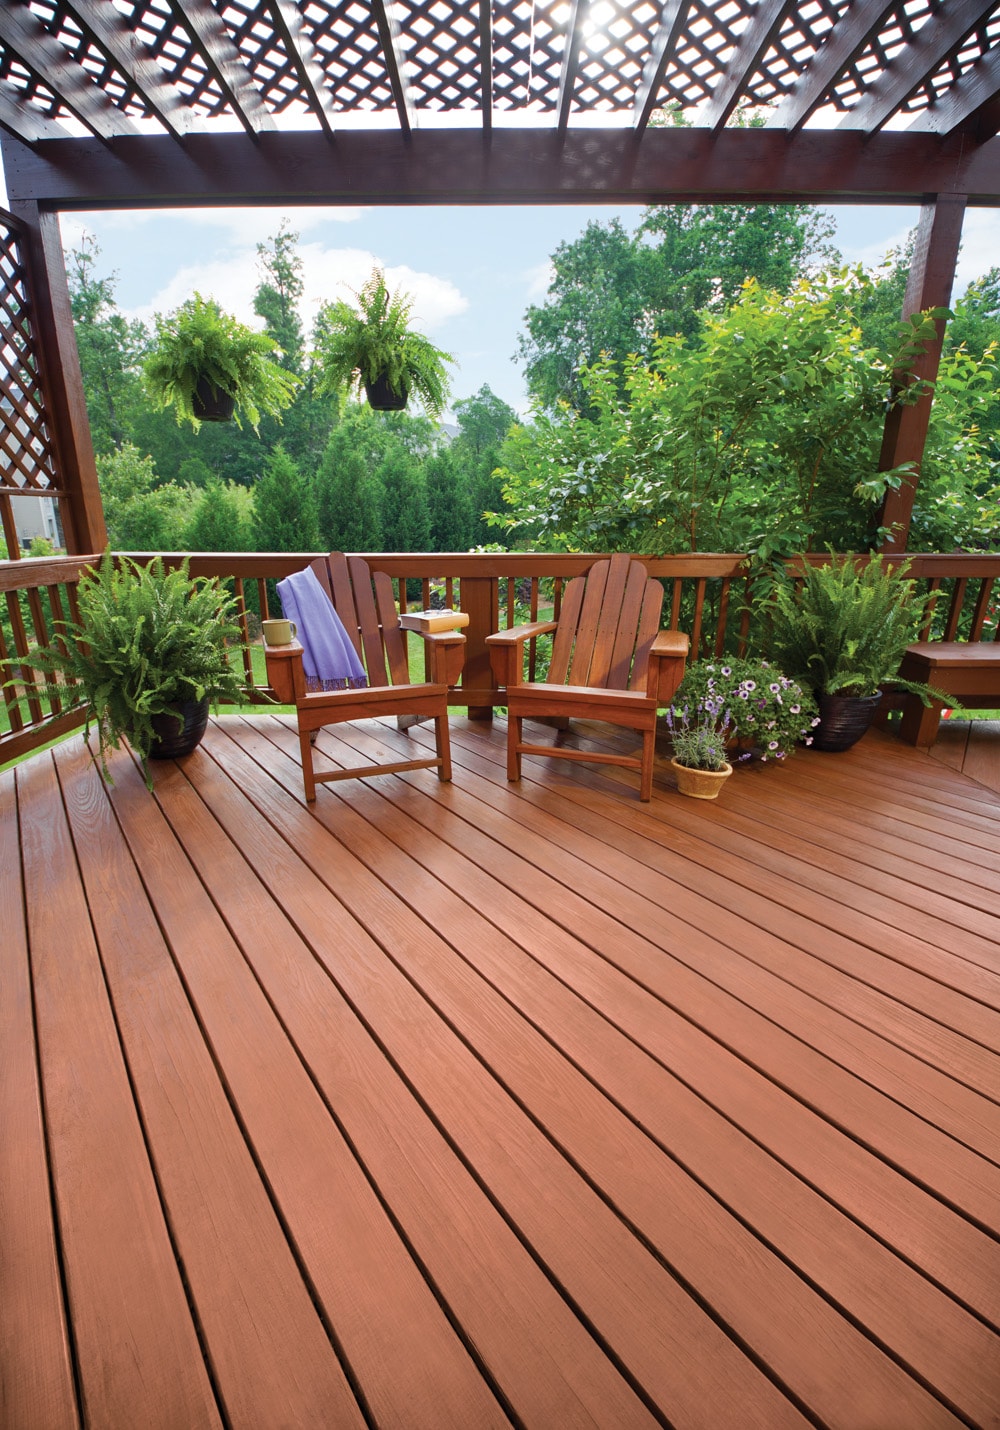 olympic deck stain colors